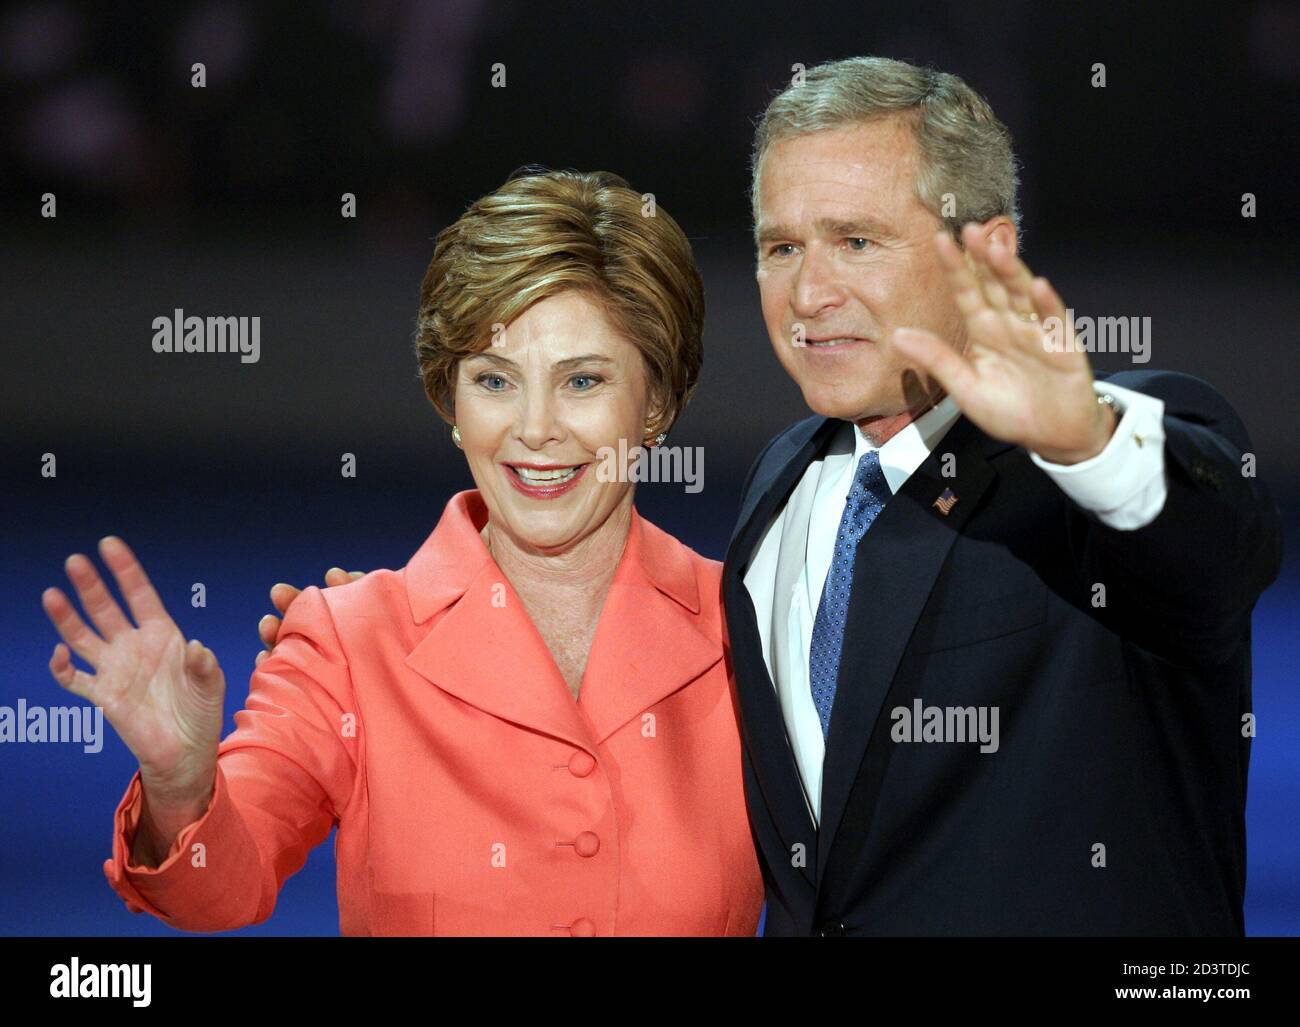 U.S. President George W. Bush and first lady Laura Bush wave to the crowd after addressing the final night of the 2004 Republican National Convention at Madison Square Garden in New York, September 2, 2004. [Bush vigorously defended his first four years in office on Thursday, promising to create a safer world and vowing: 'I will never relent in defending America -- whatever it takes.'] Stock Photo